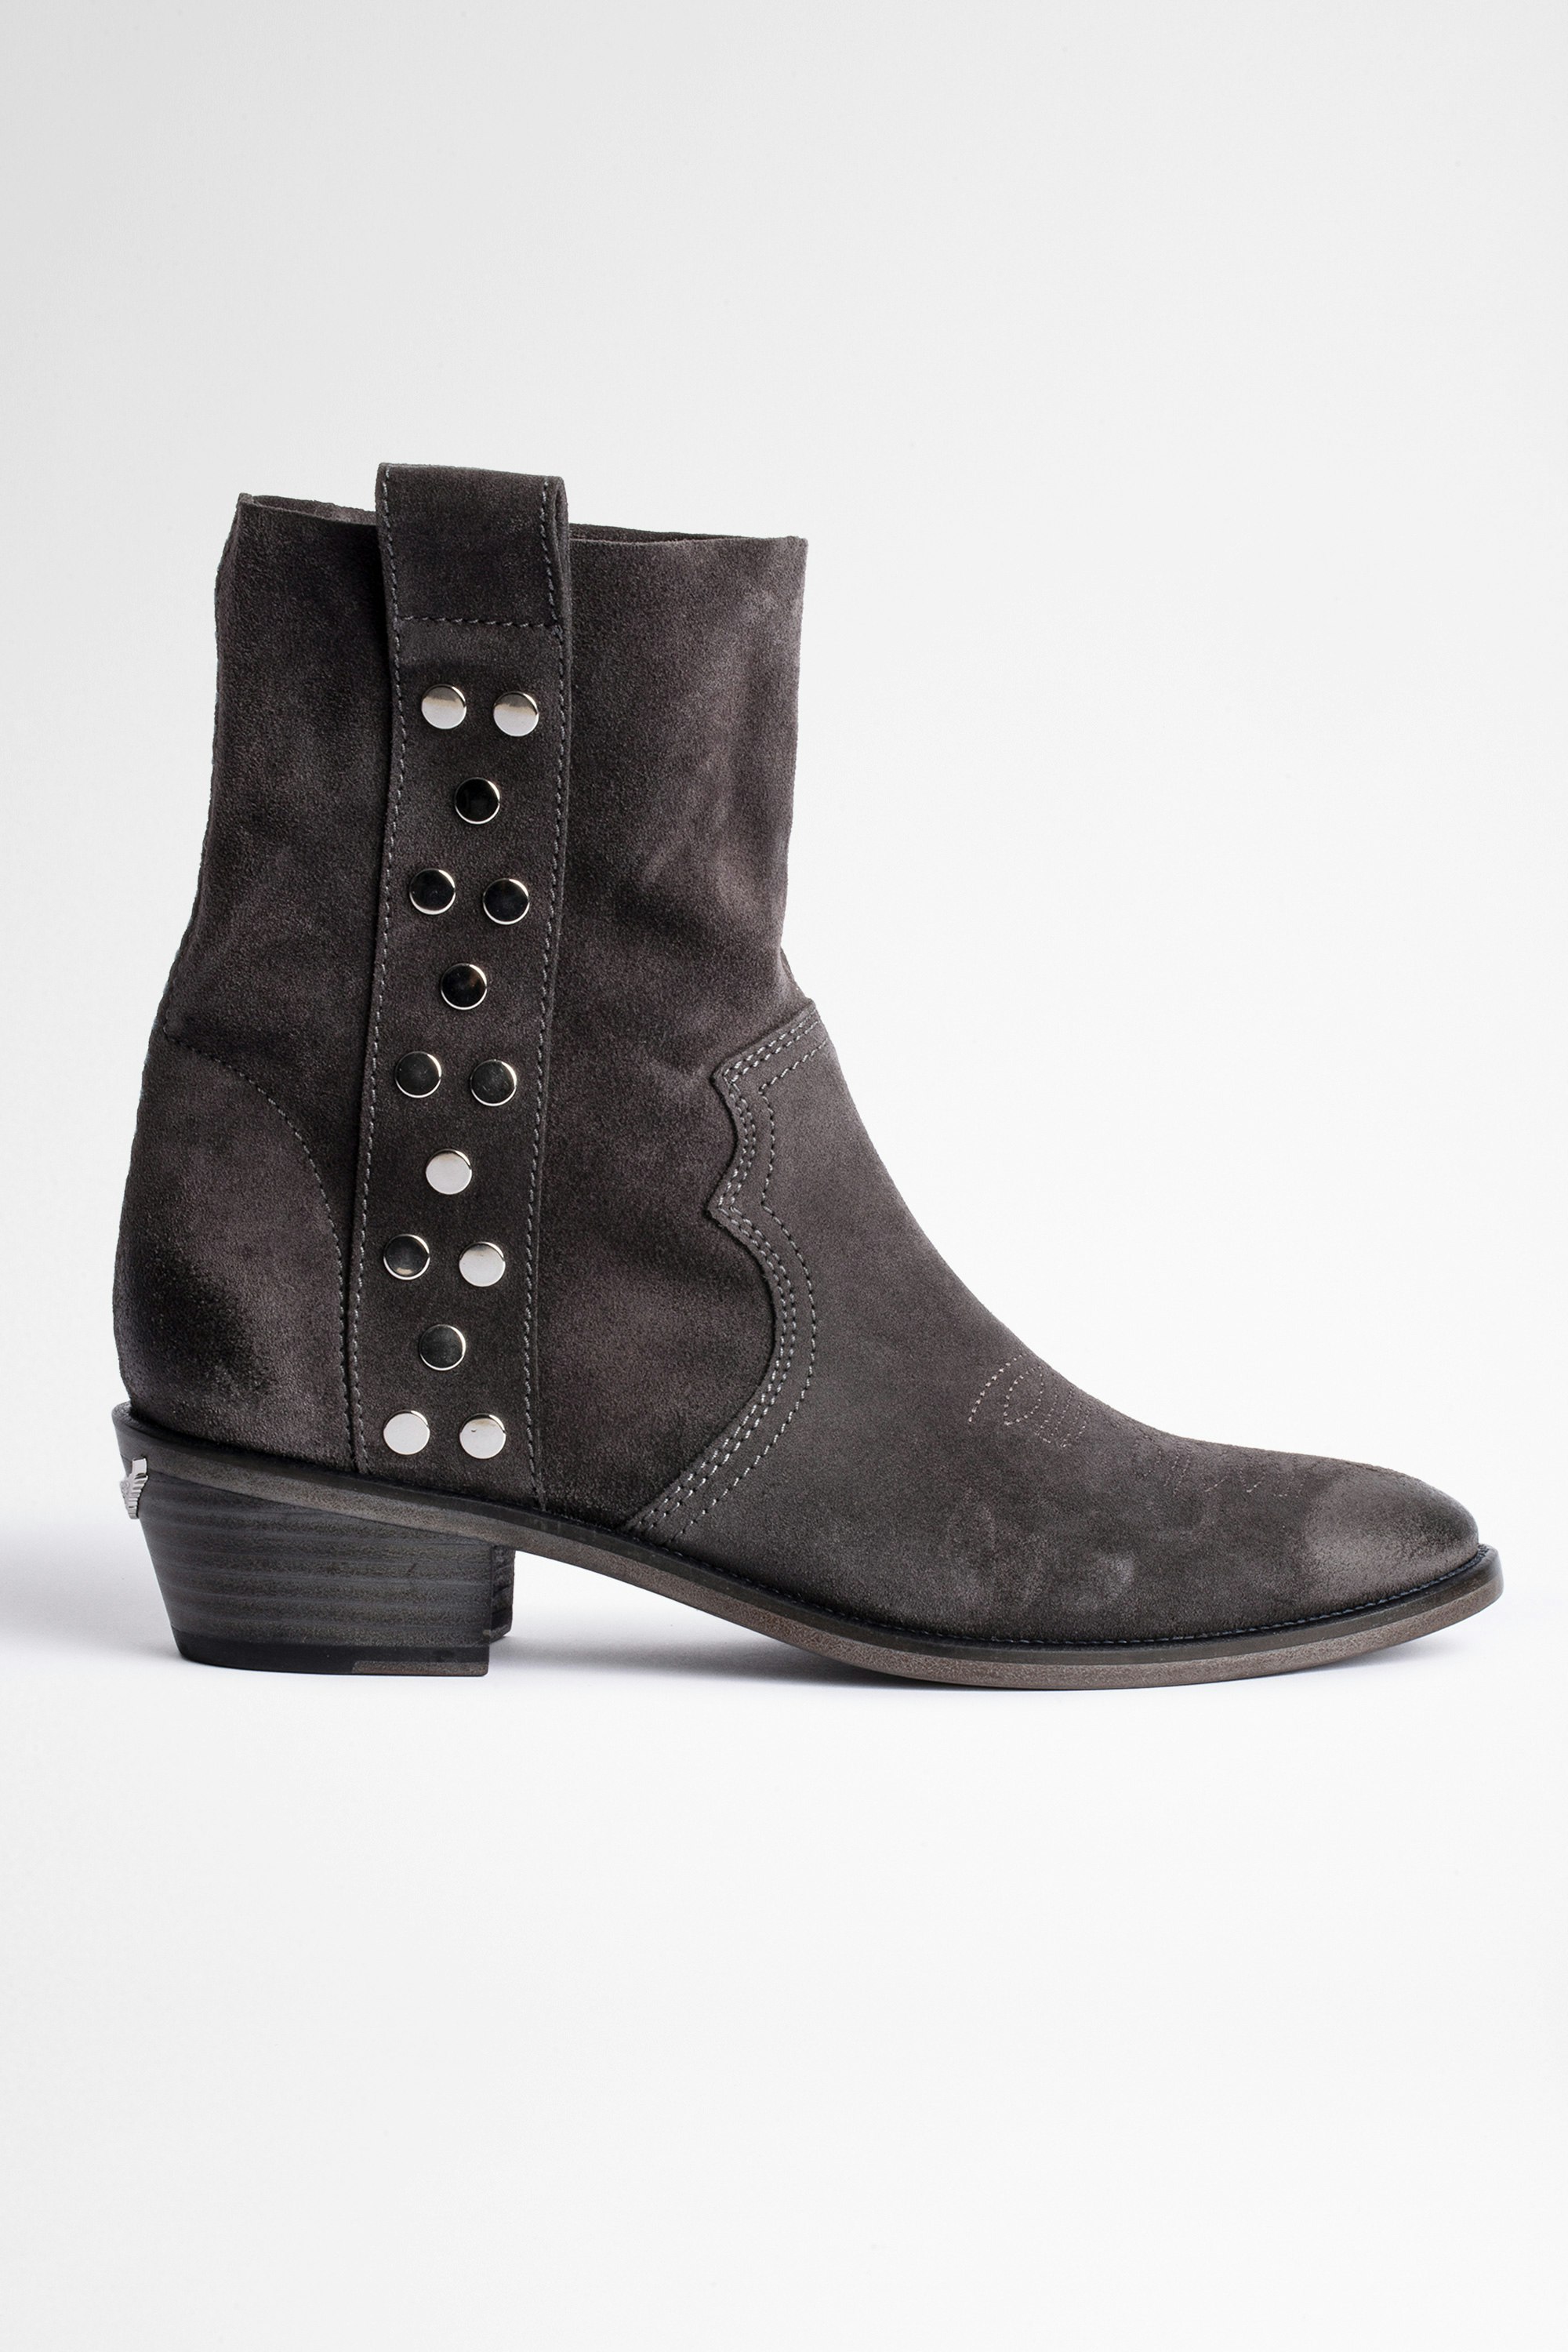 Pilar High Suede Ankle レザーブーツ Women's dark grey suede boots with silver studs